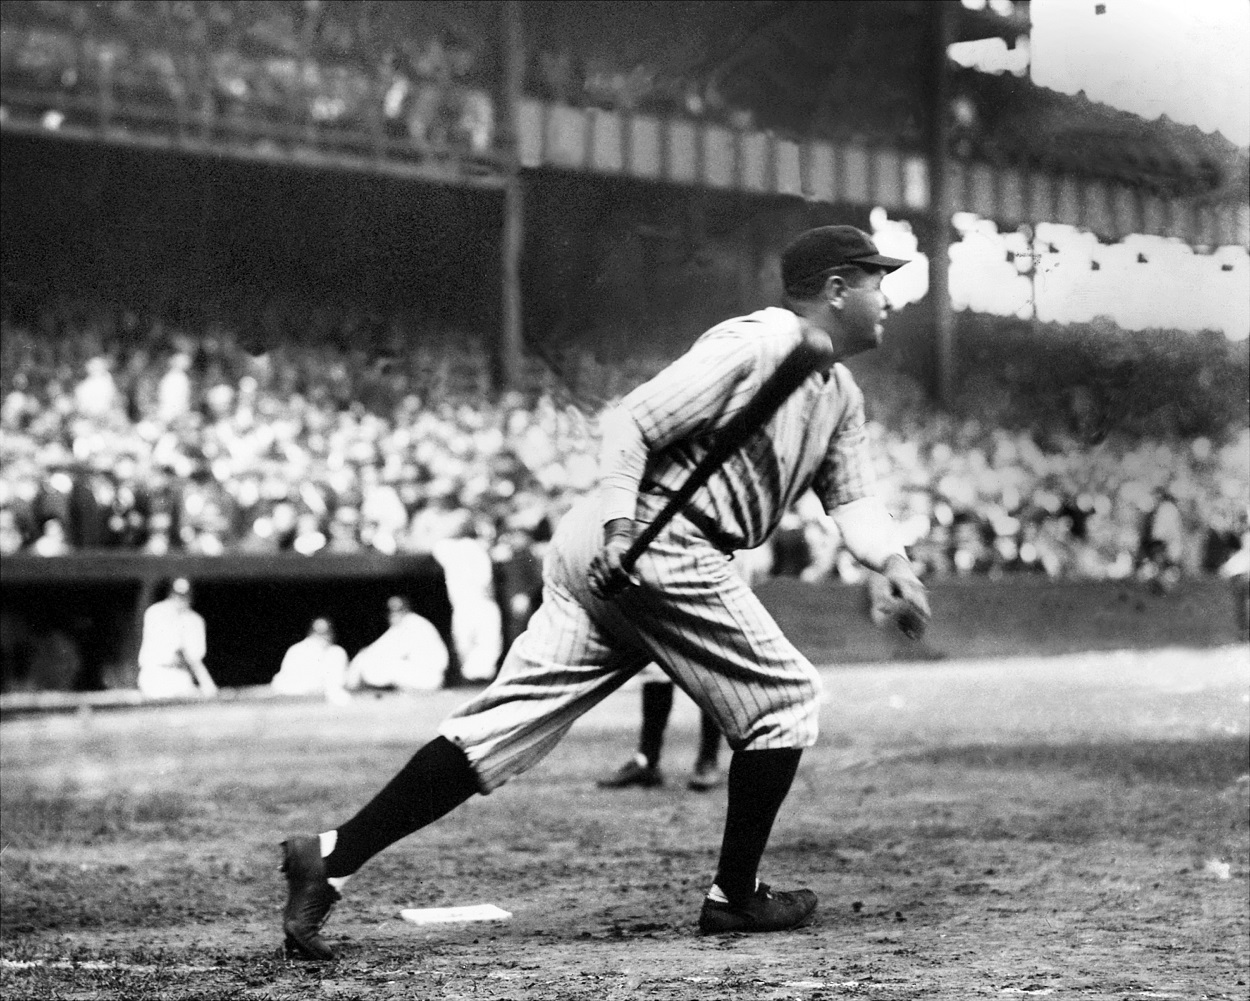 Babe Ruth takes a swing during the 1926 MLB season